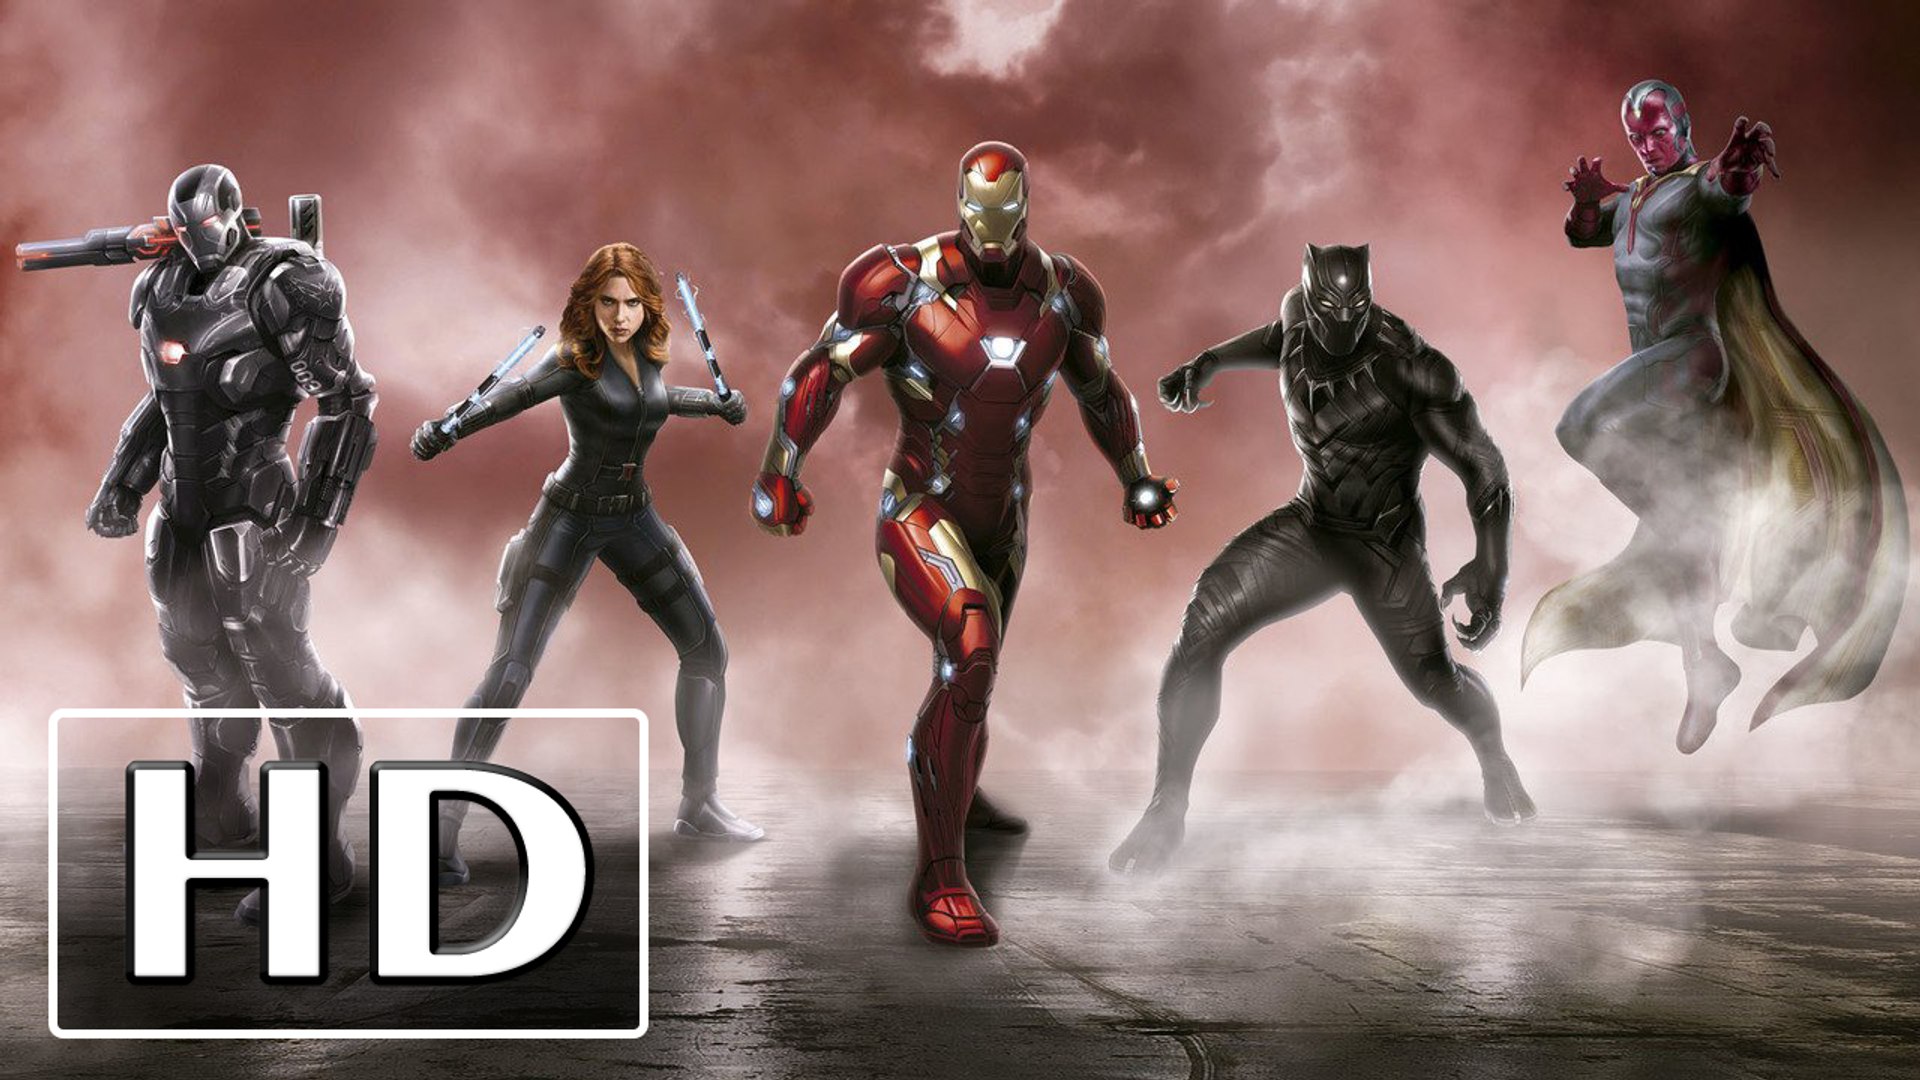 Captain America: Civil War Full Movie (2016) 720p HD Free Online - New Thriller, Action, Science Fic